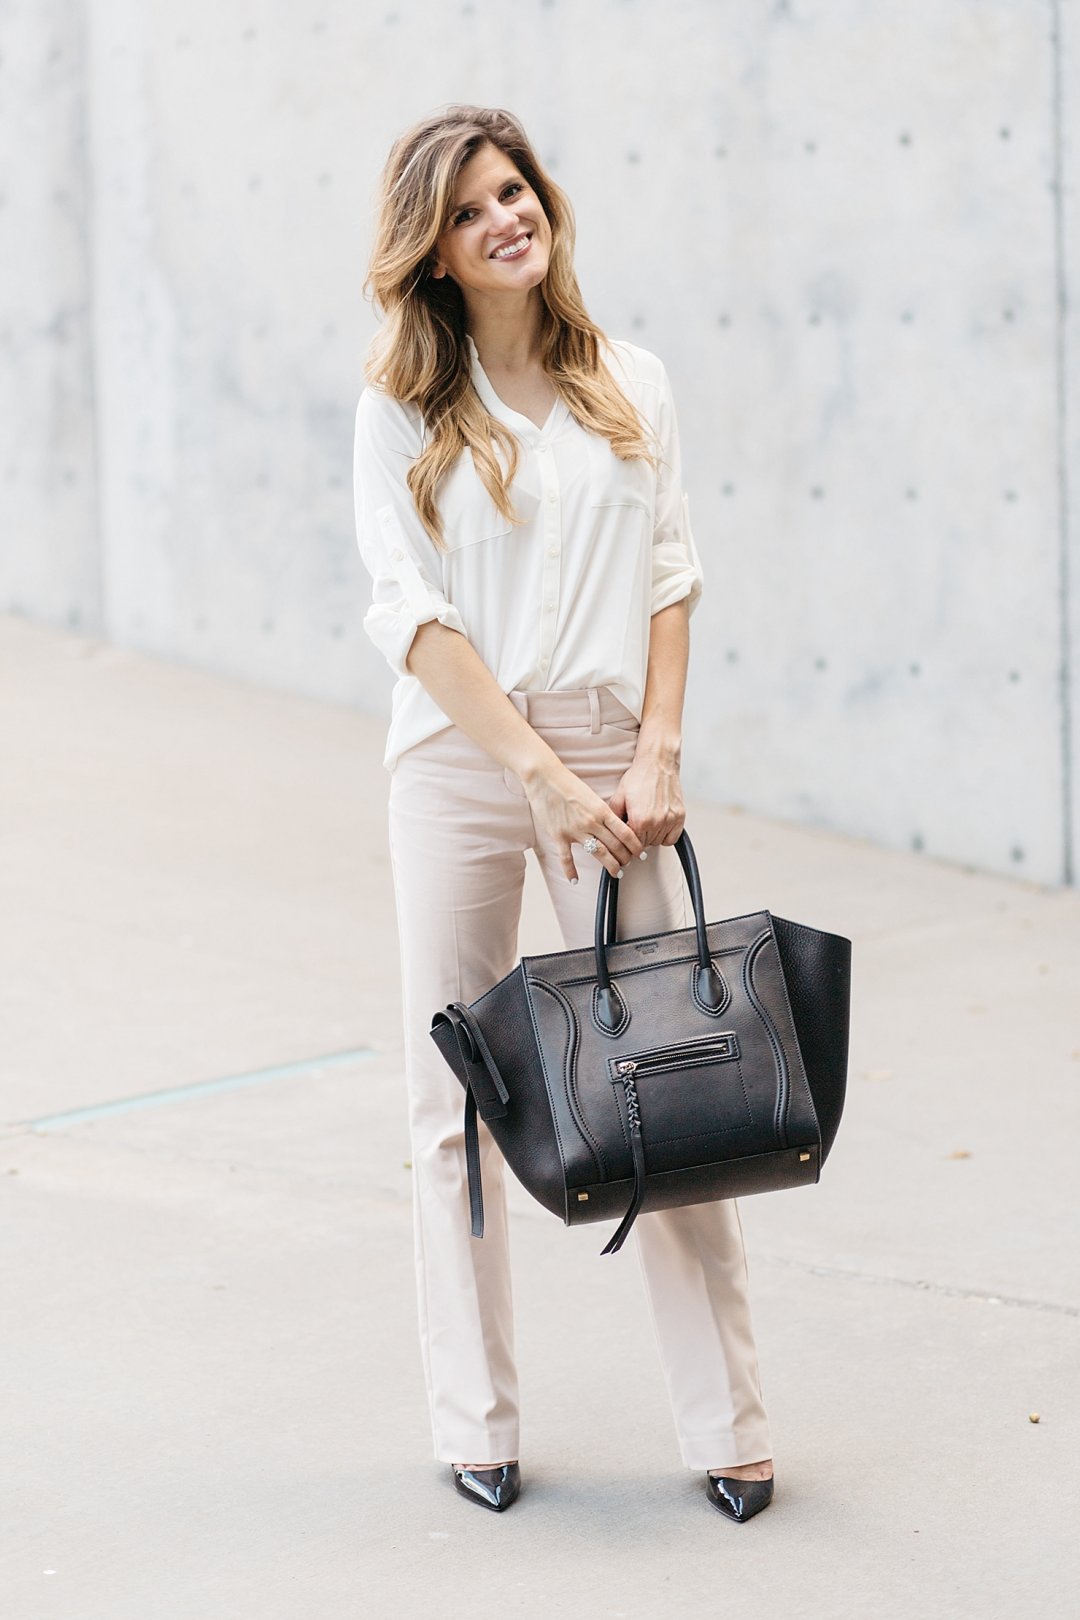 42 Things to Wear: Celine Bag Outfits ideas